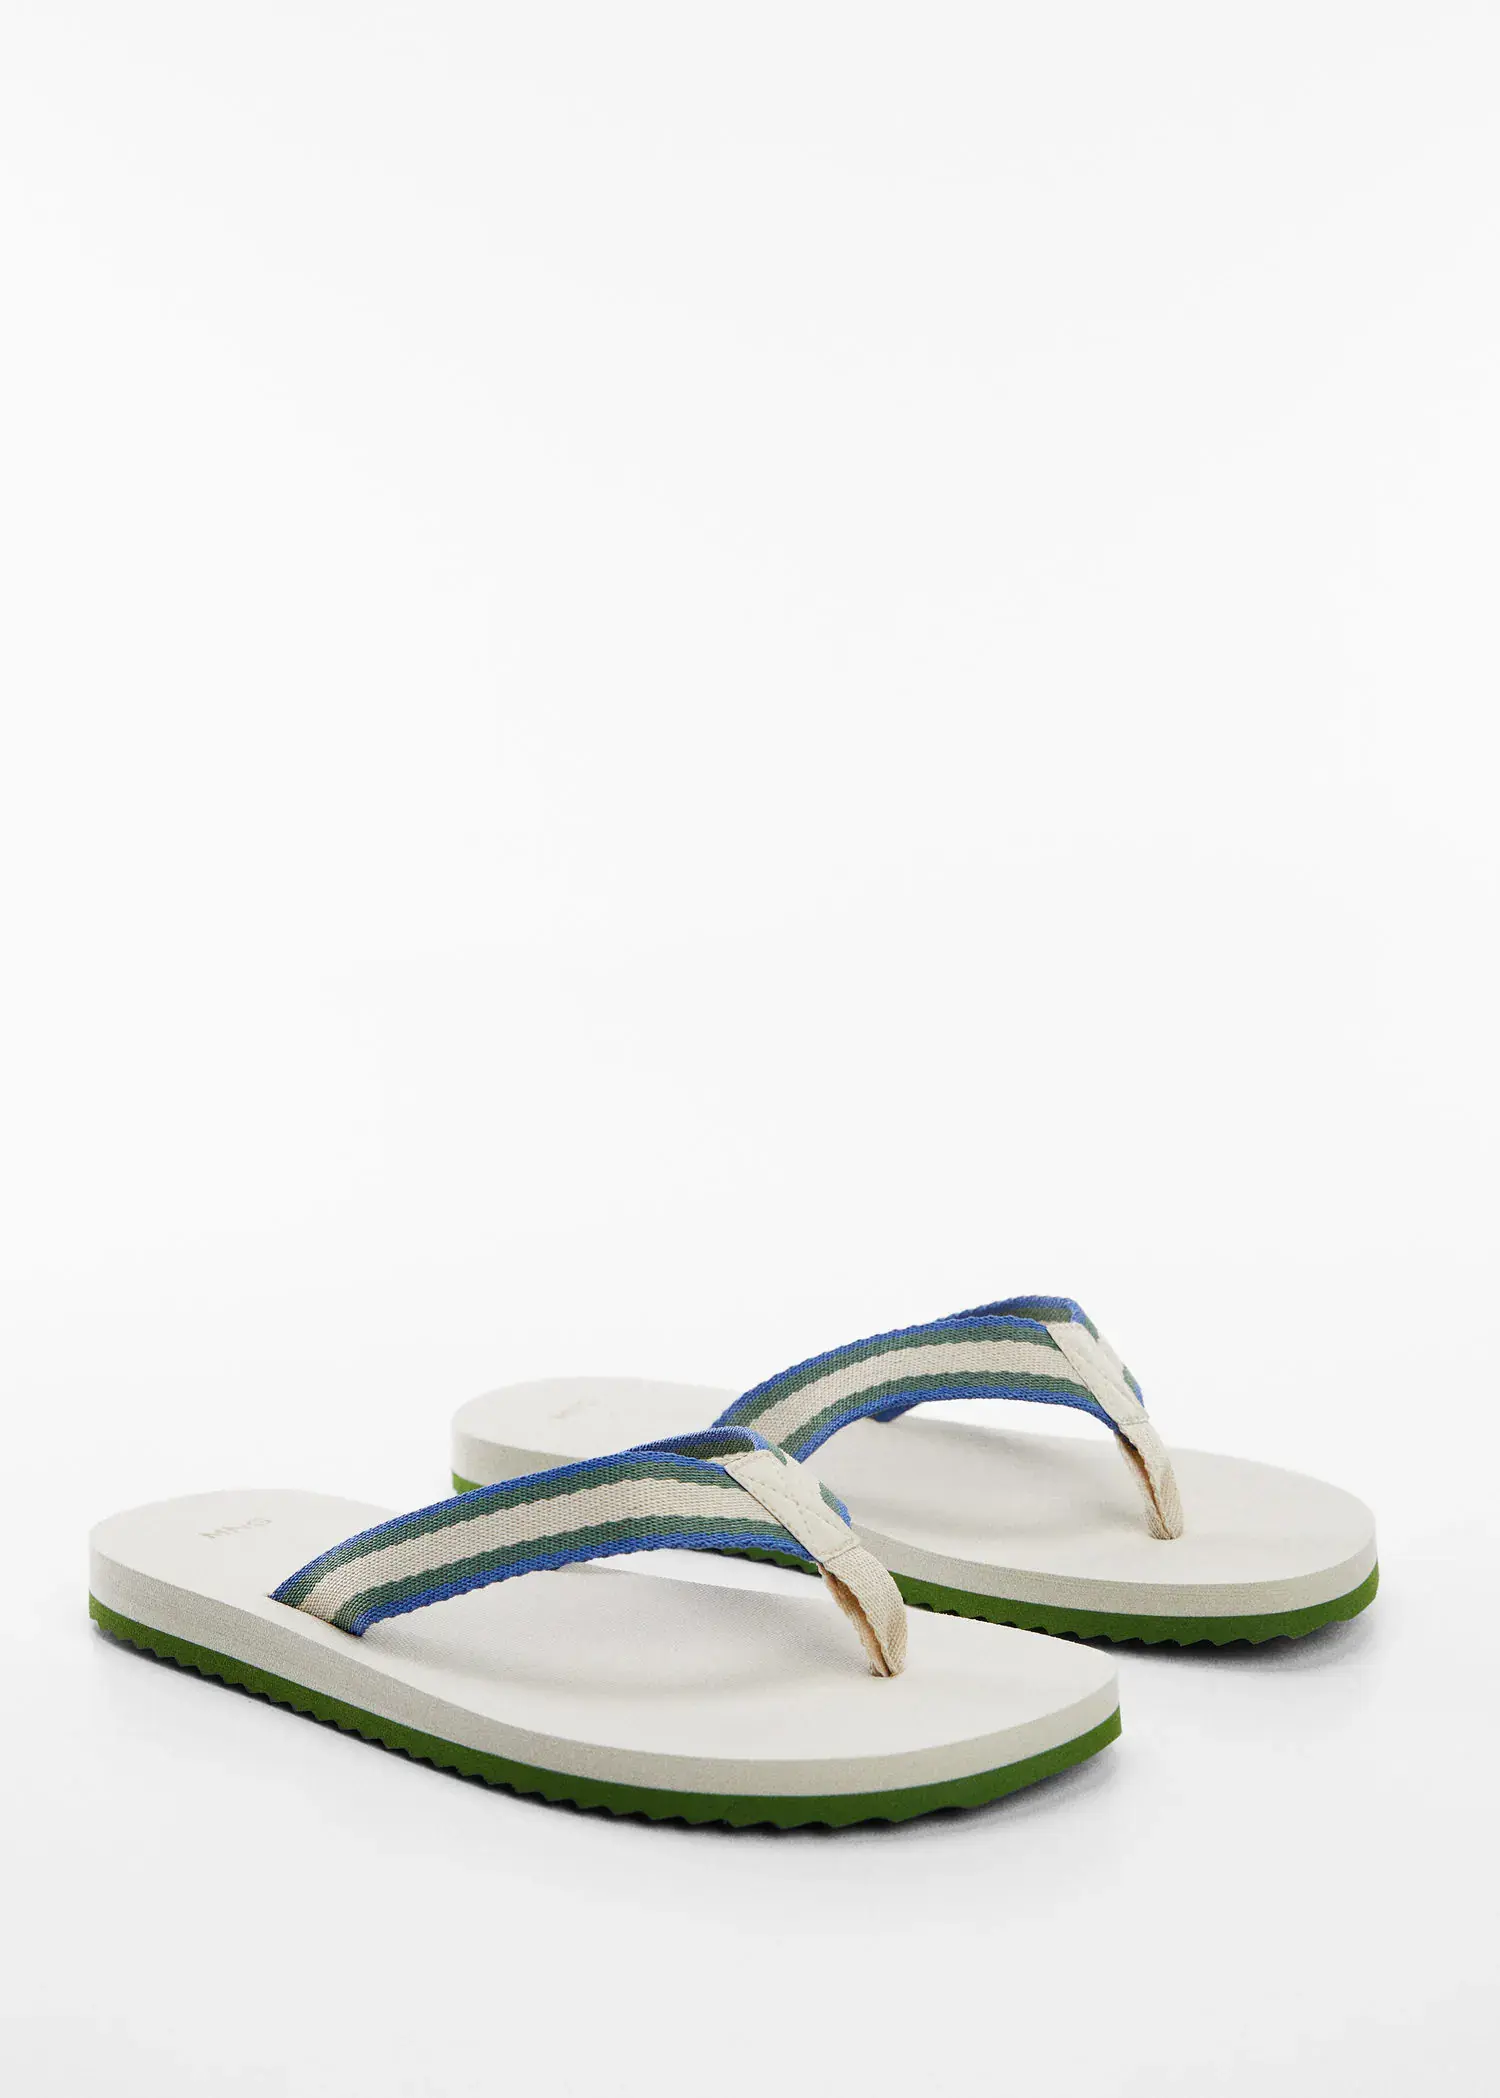 Mango Flip-flops with contrasting colour straps. a pair of flip flops sitting on top of a white surface. 